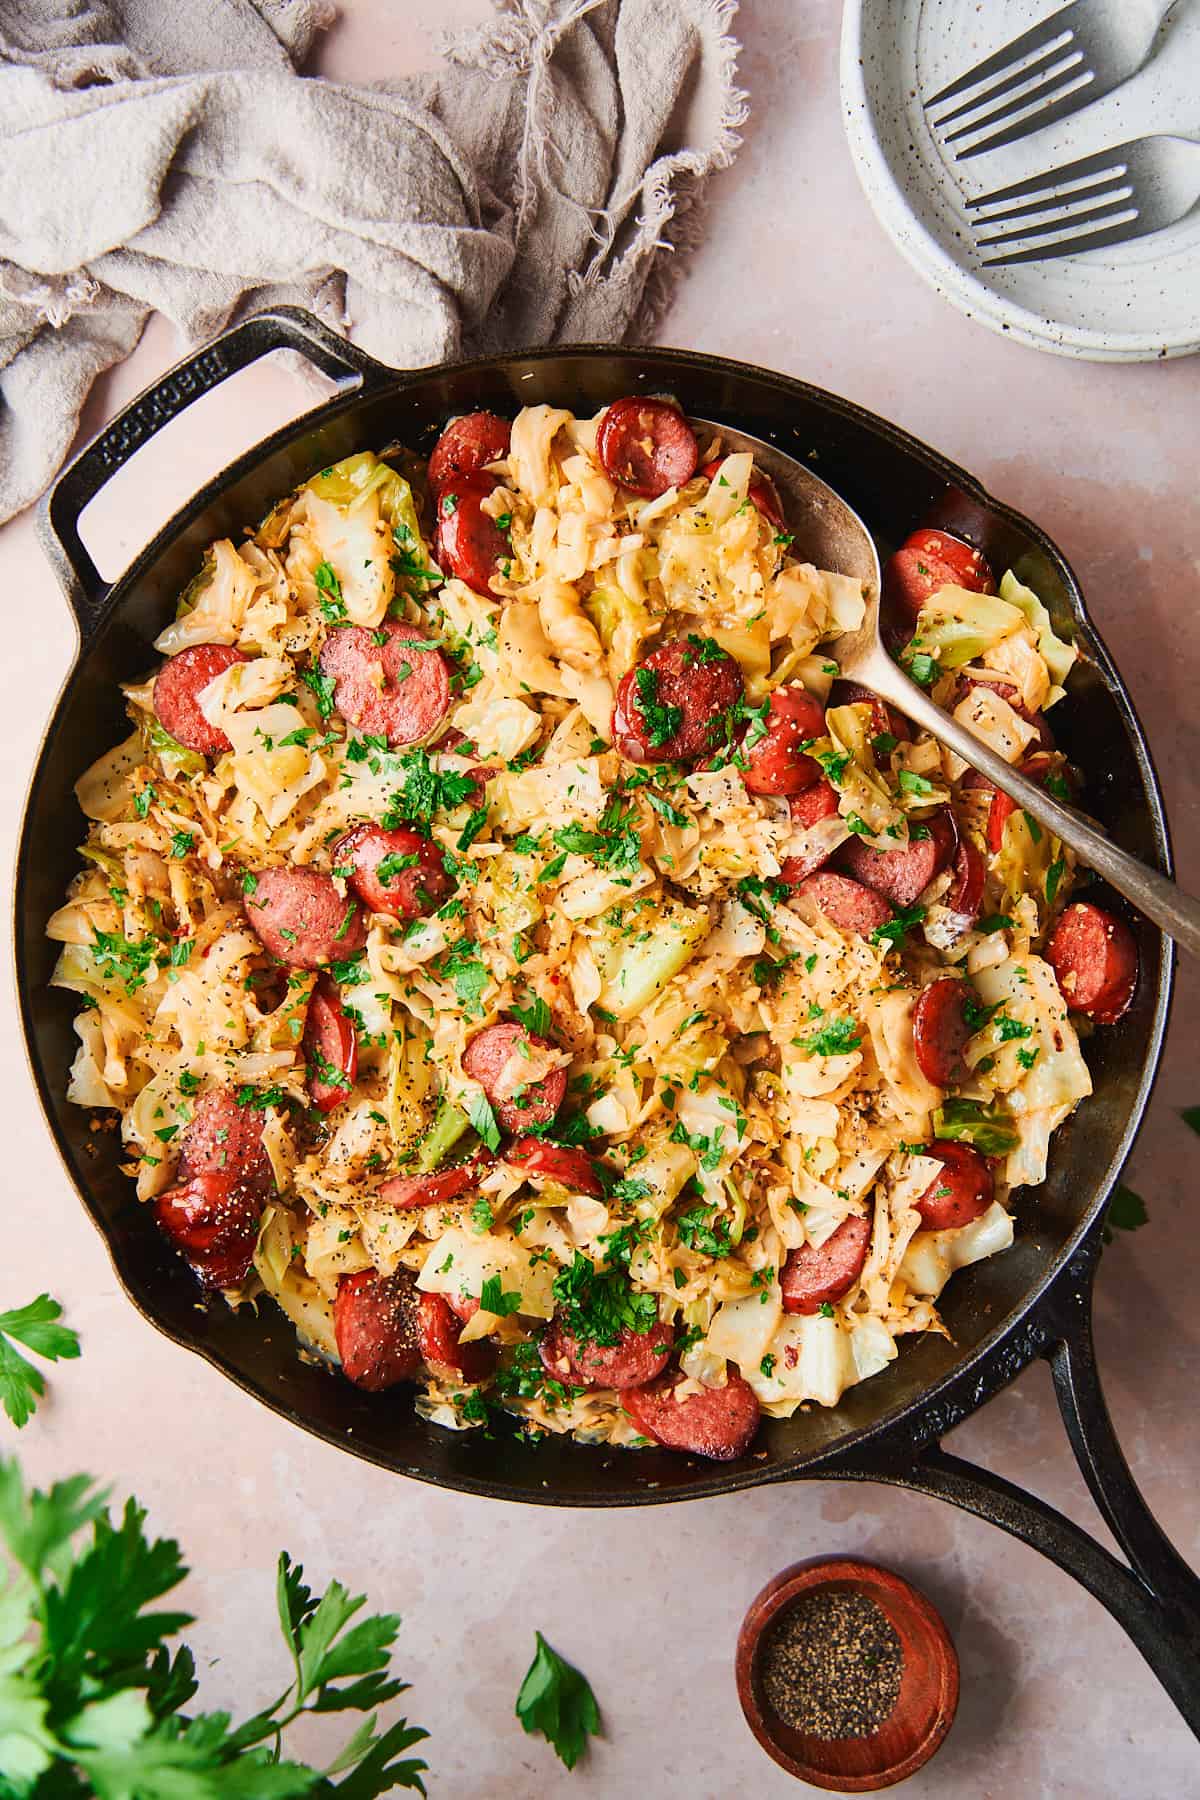 Cabbage and sausage recipe in a cast iron skillet on a warm backdrop.